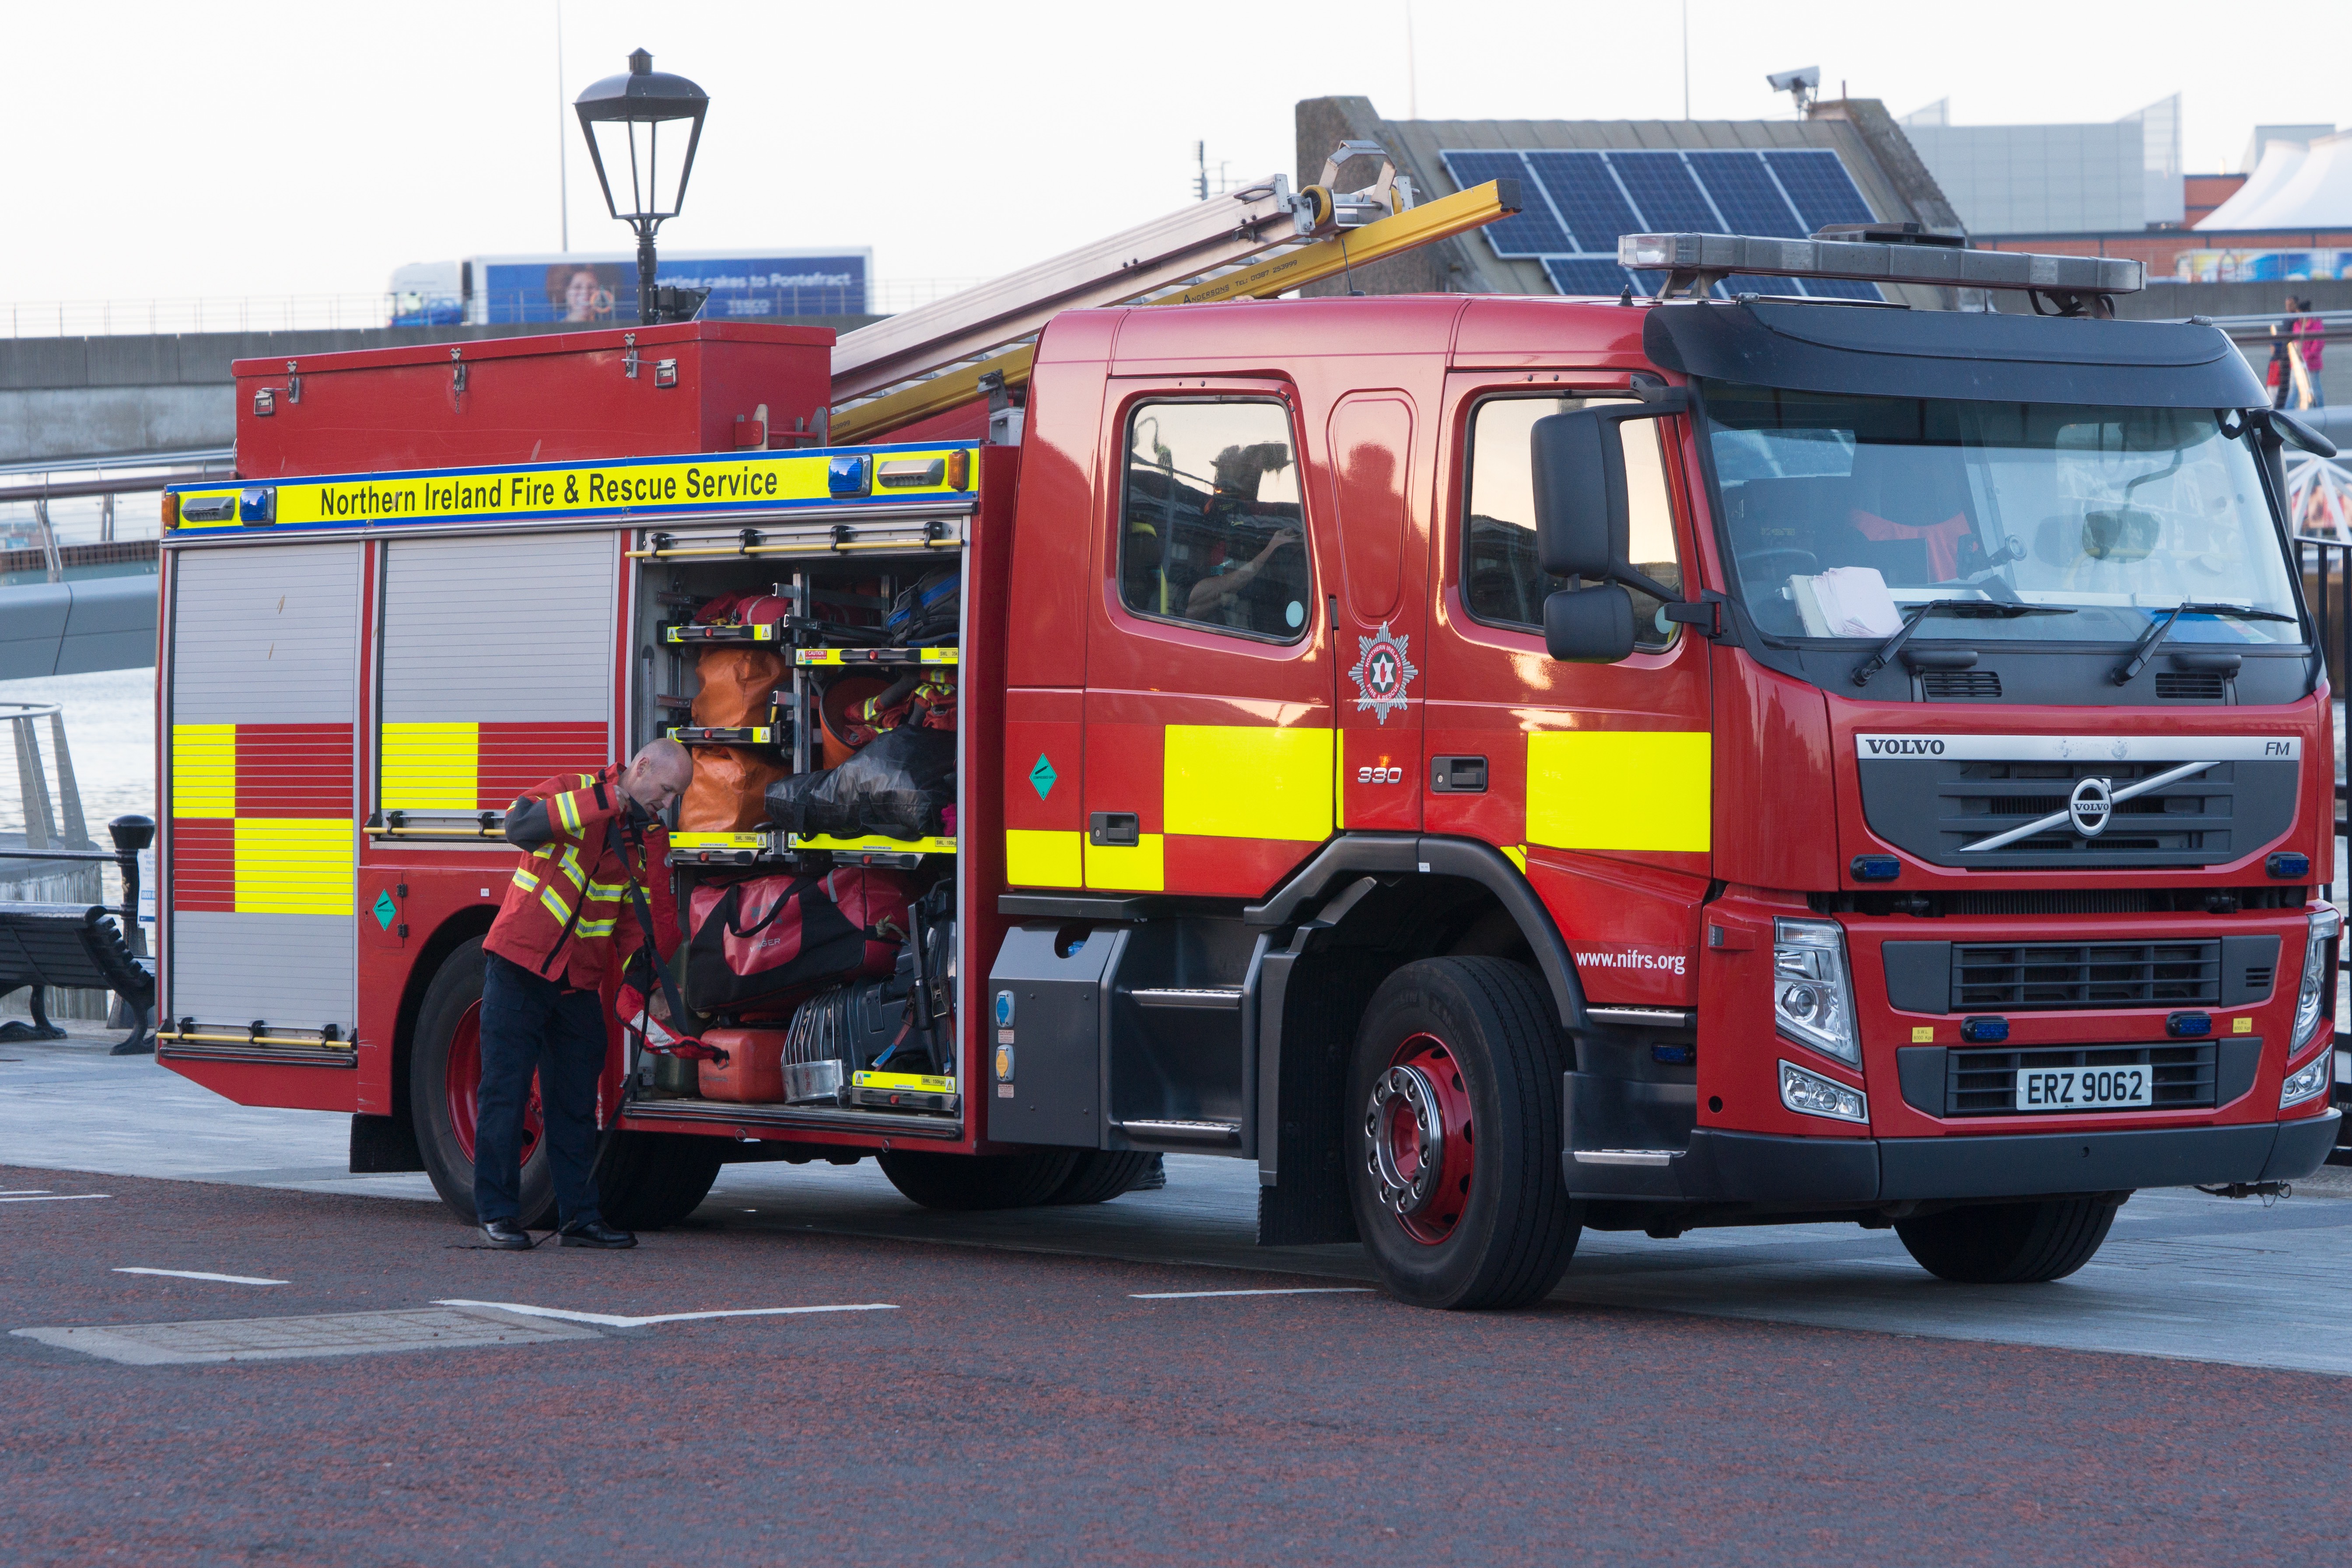 NORTHERN IRELAND FIRE AND RESCUE SERVICE IN BELFAST  002